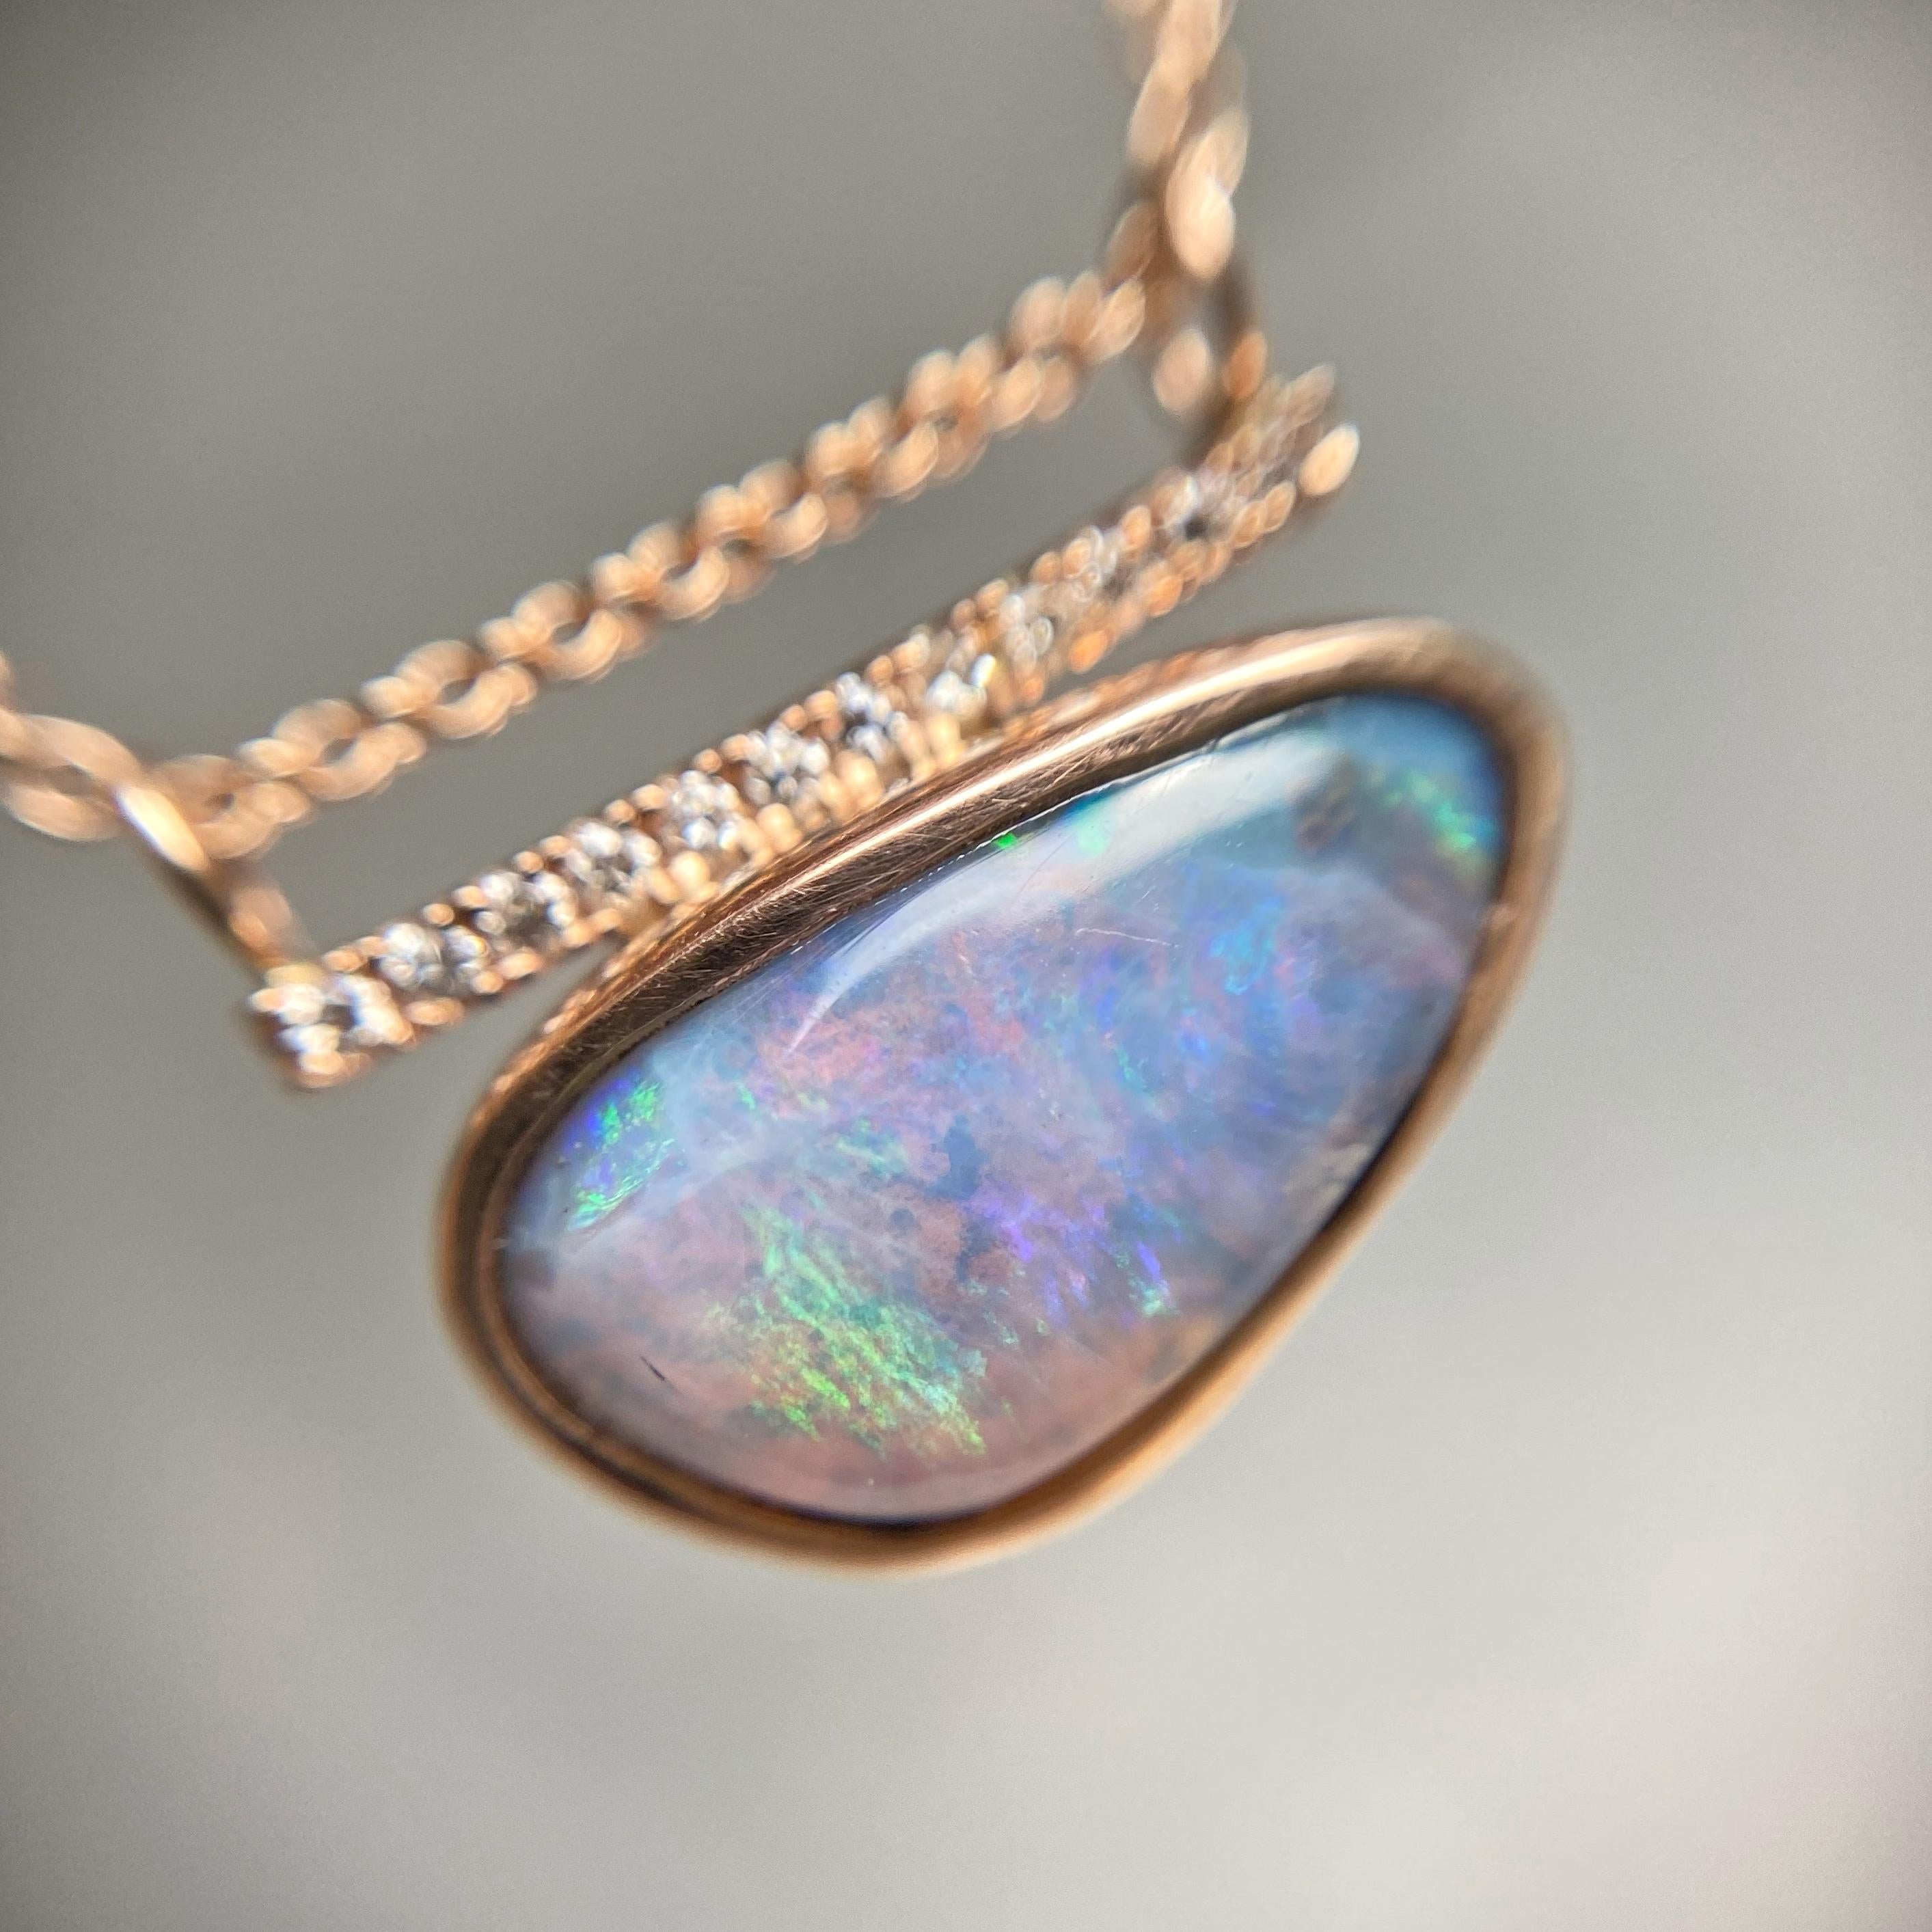 Women's Head in the Clouds Rose Gold Opal Necklace No. 15 with Diamonds by NIXIN Jewelry